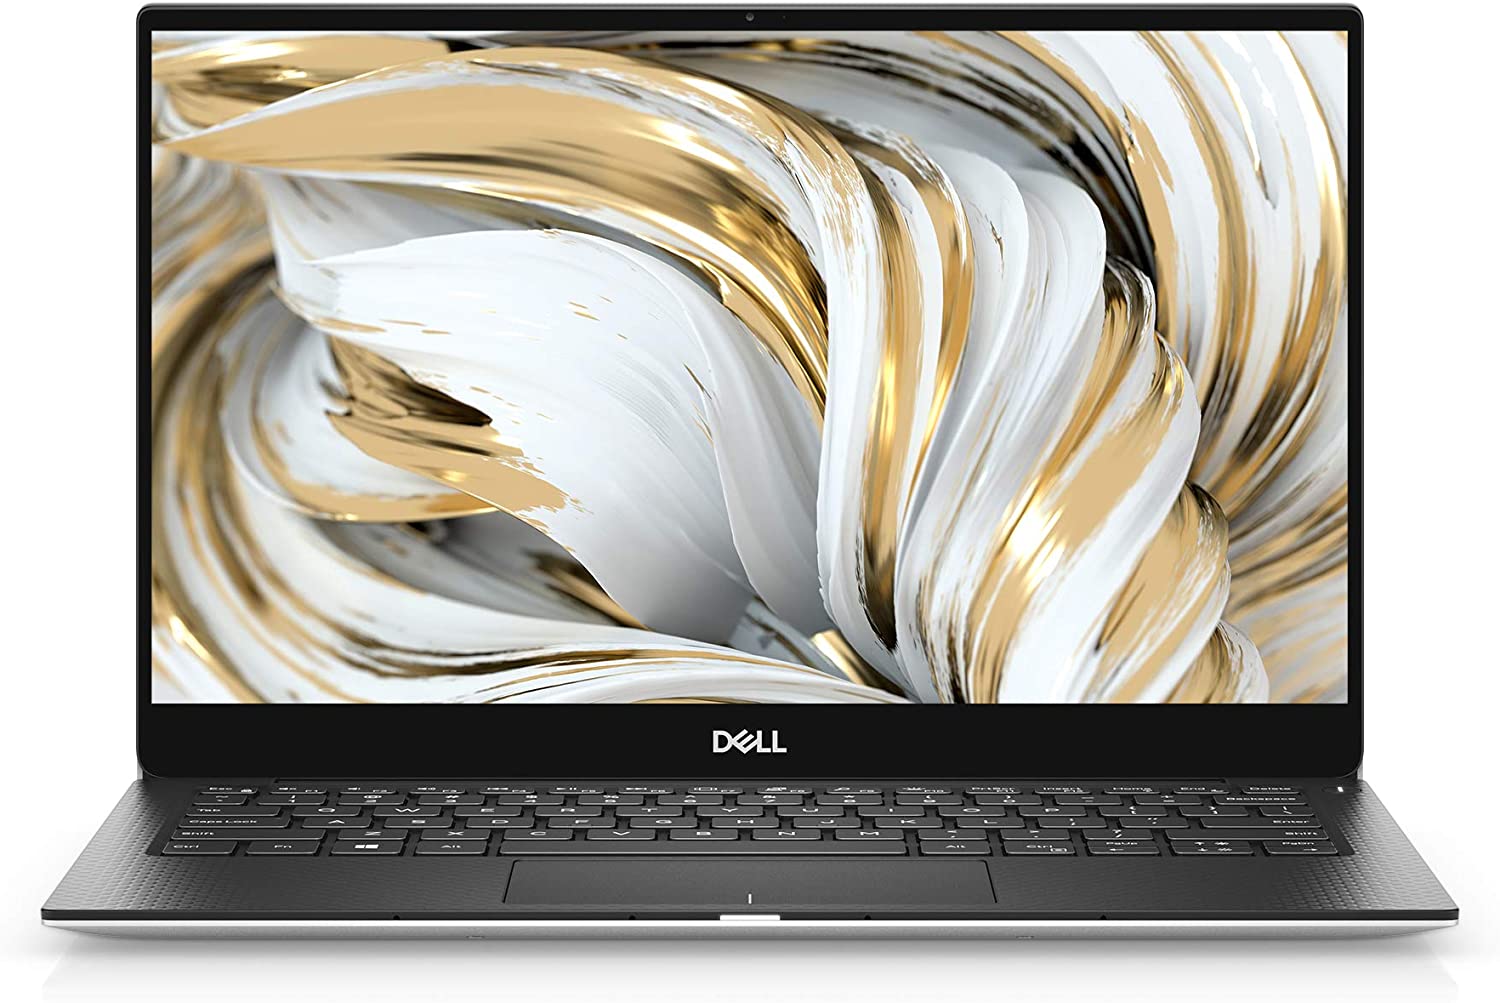 Dell XPS 13 9305 - Specs, Tests, and Prices | LaptopMedia.com